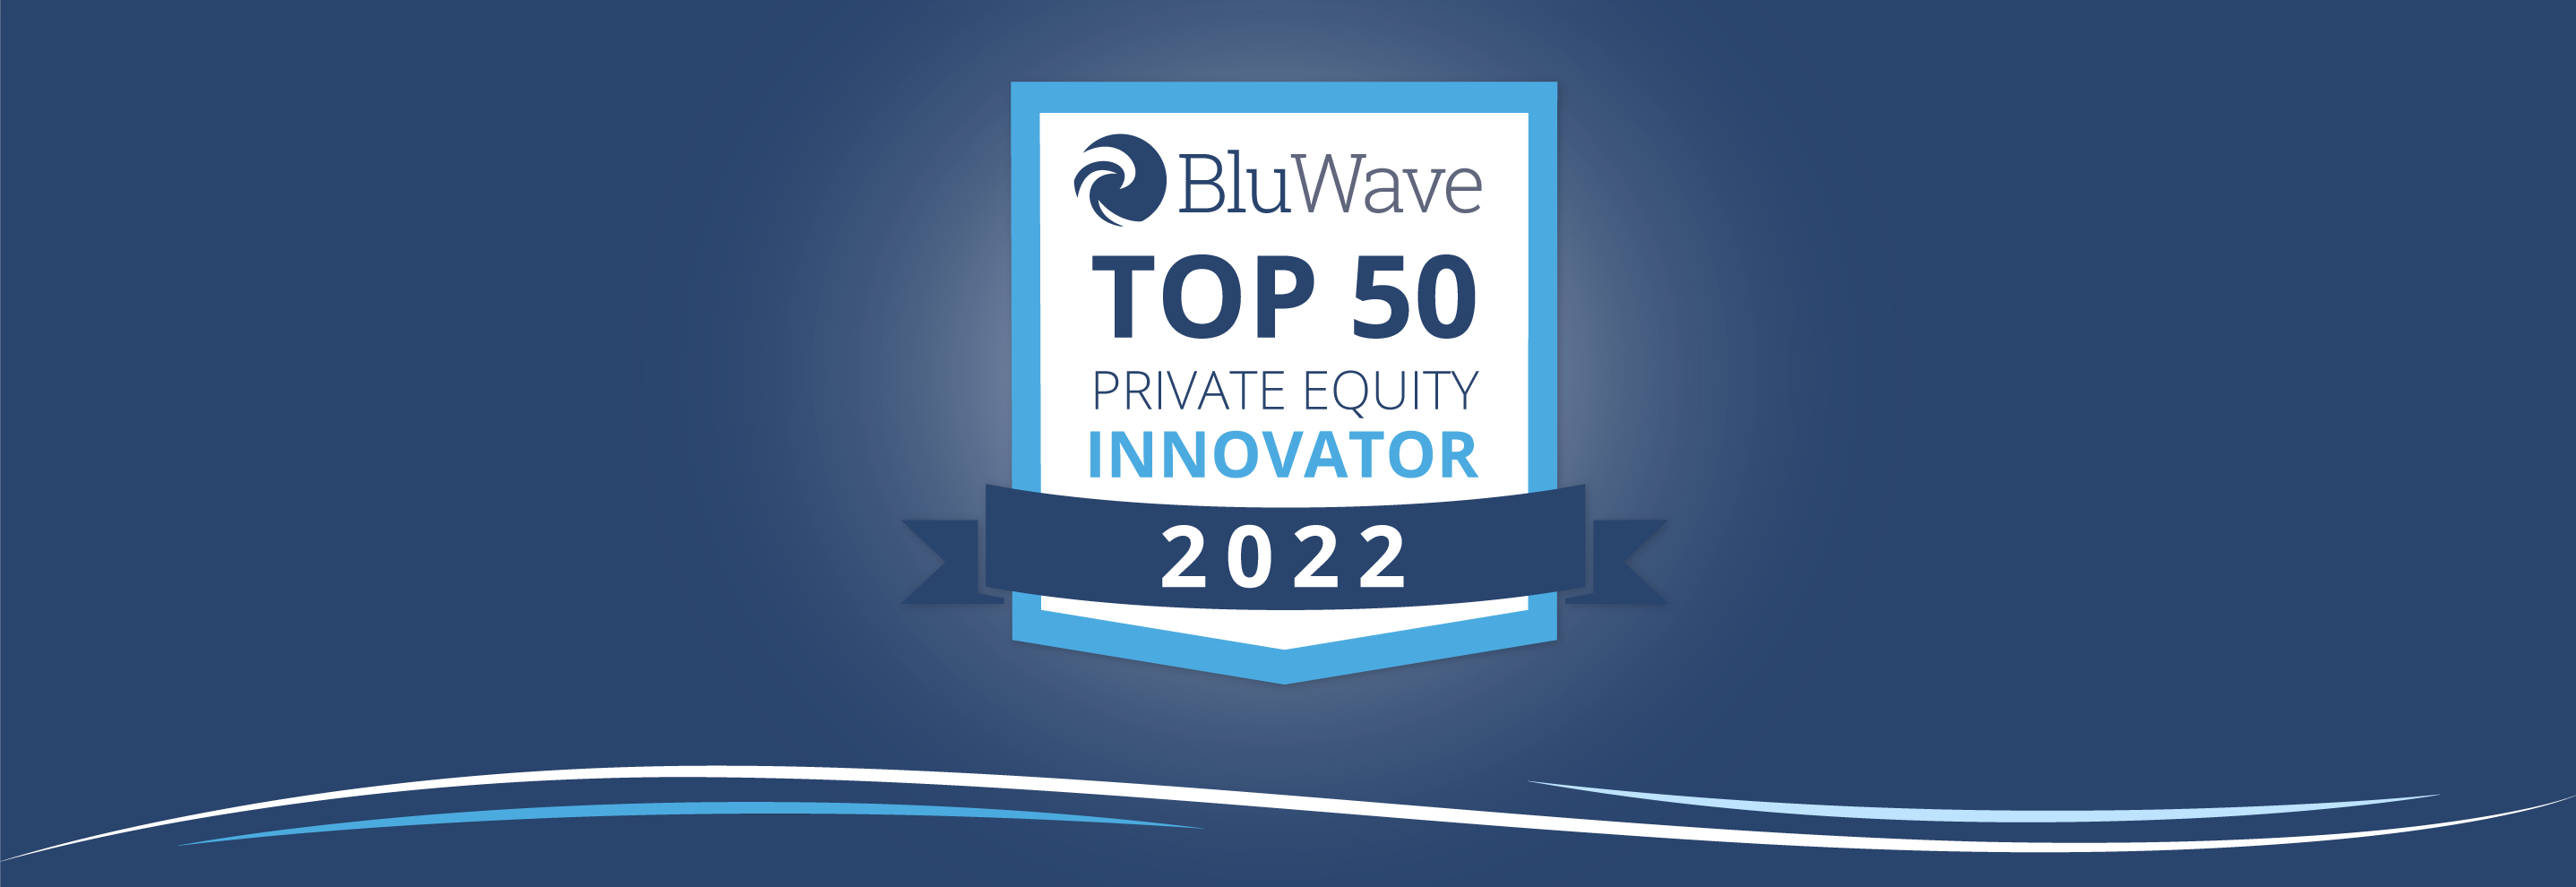 Top 50 Private Equity Innovator Awards | 2022